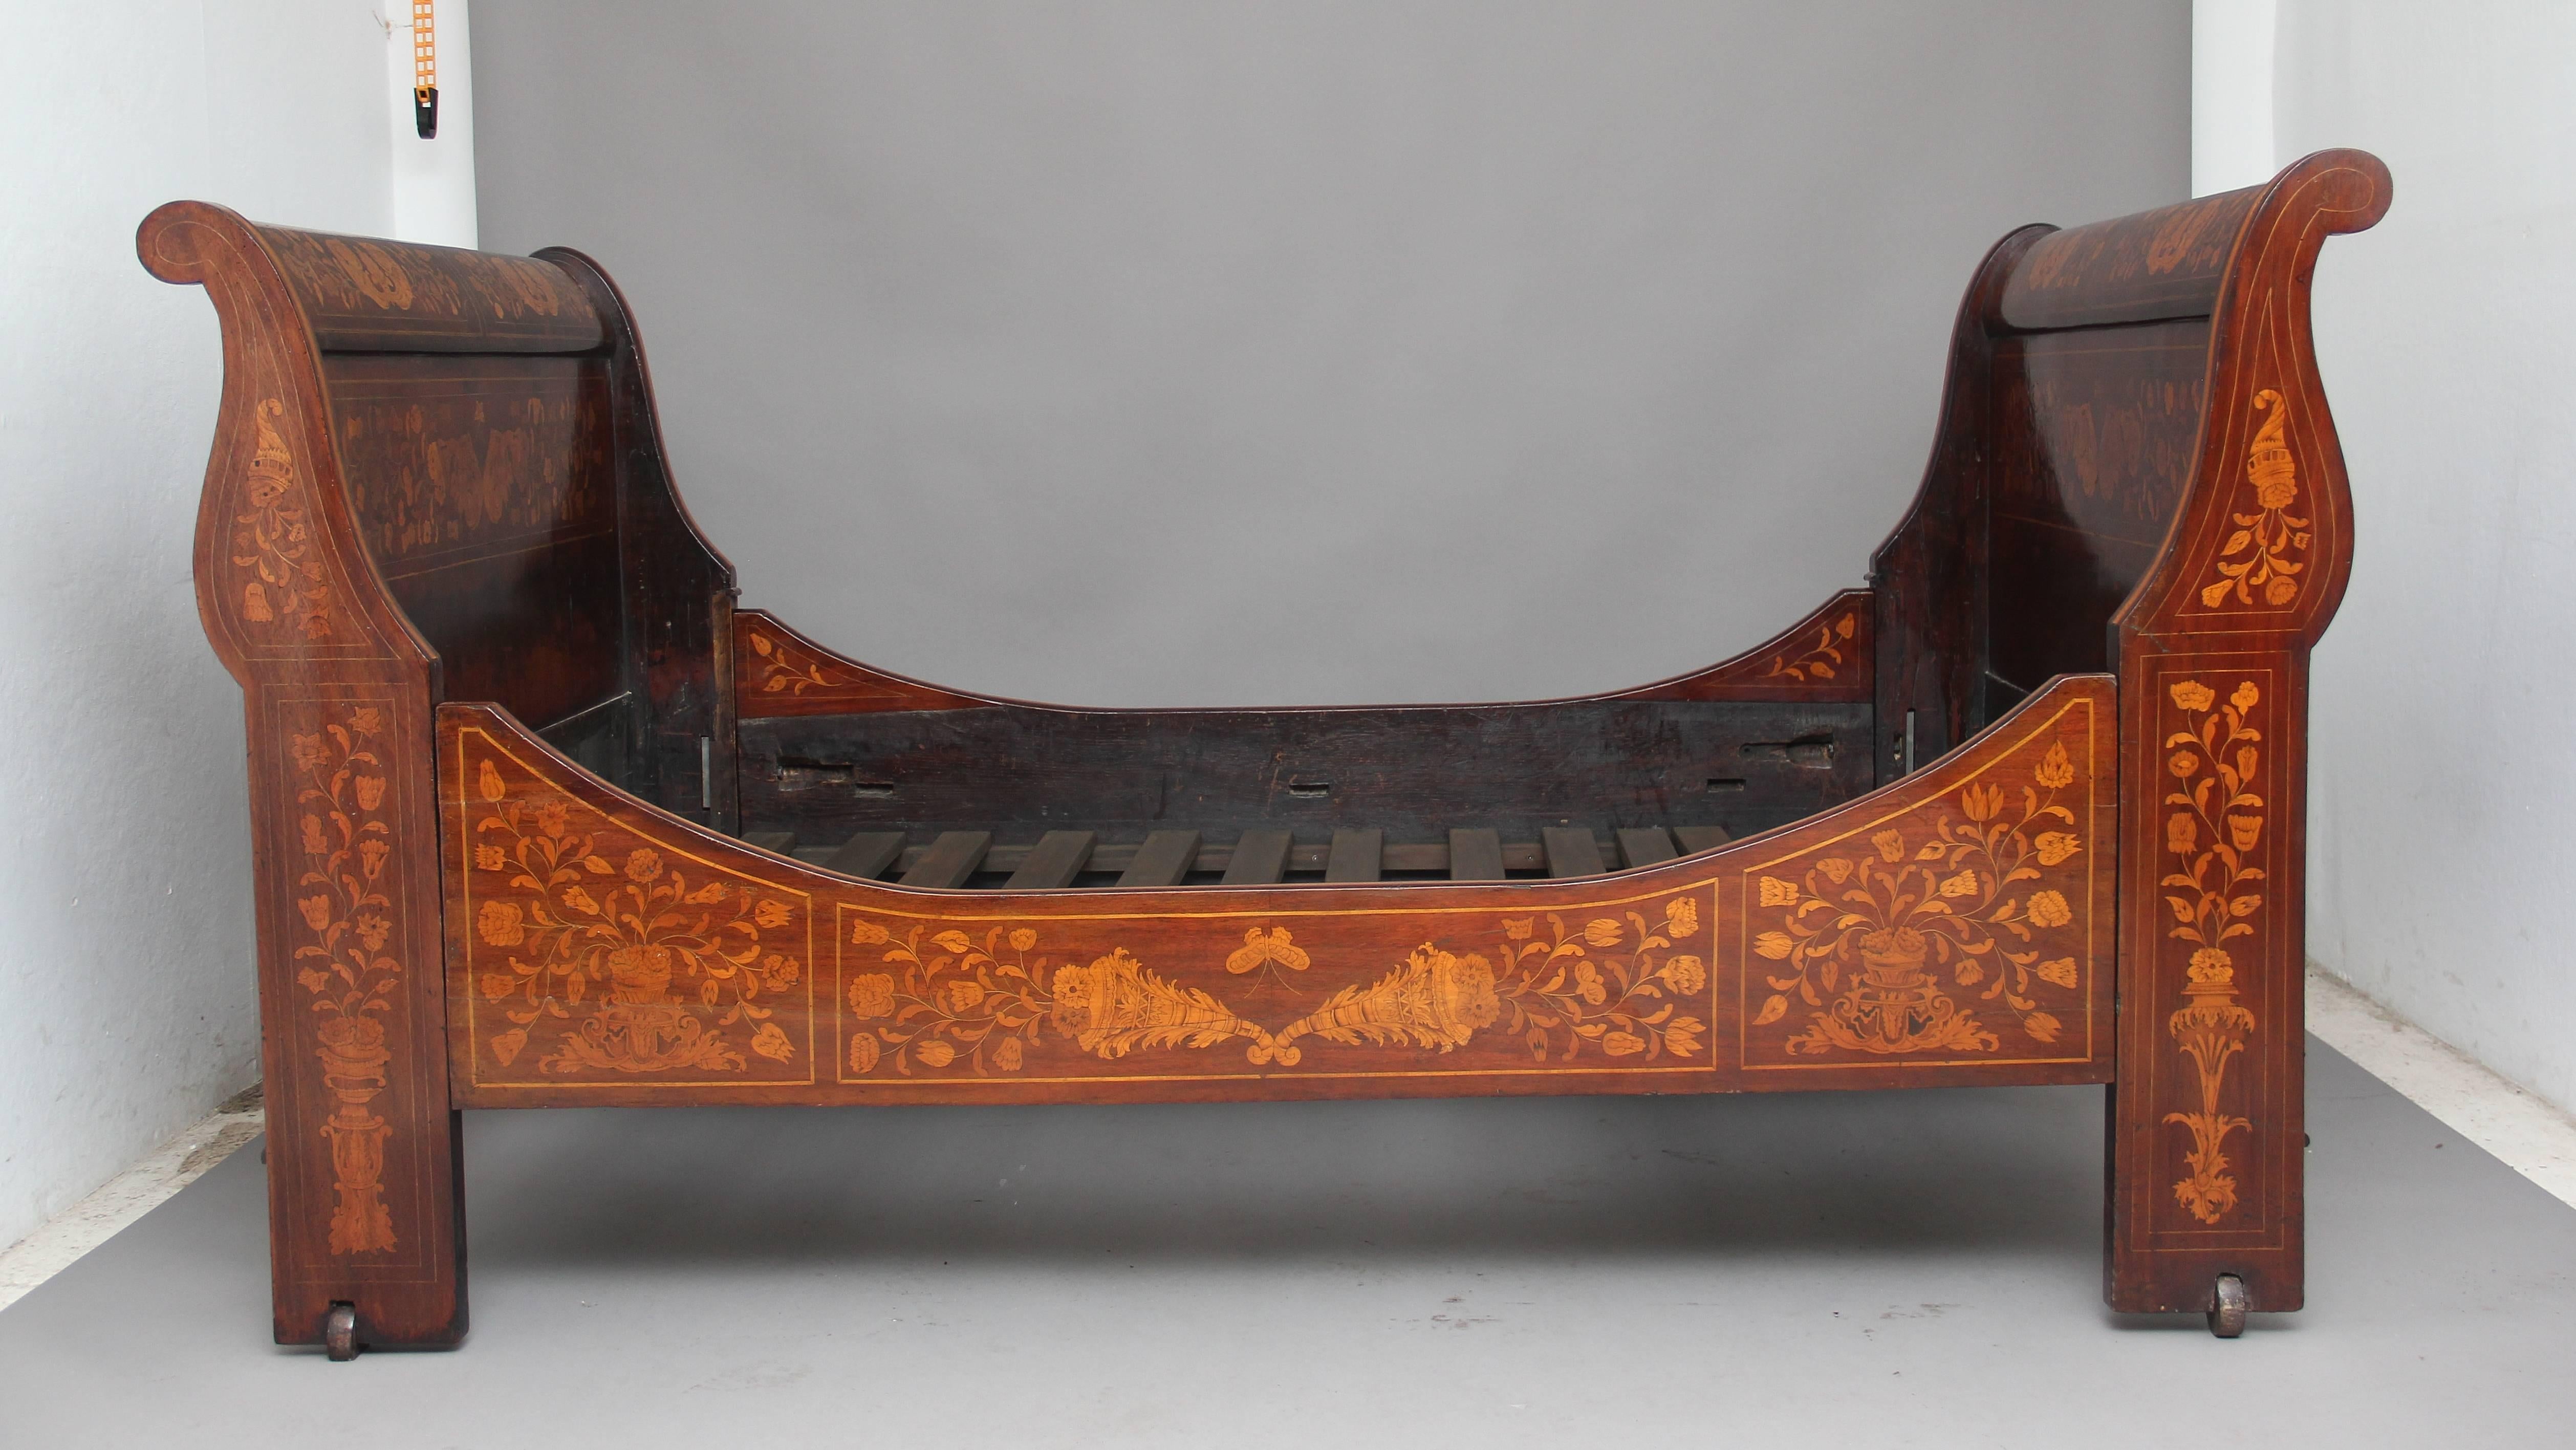 Early 19th Century 19th Century Dutch Mahogany and Marquetry Bed